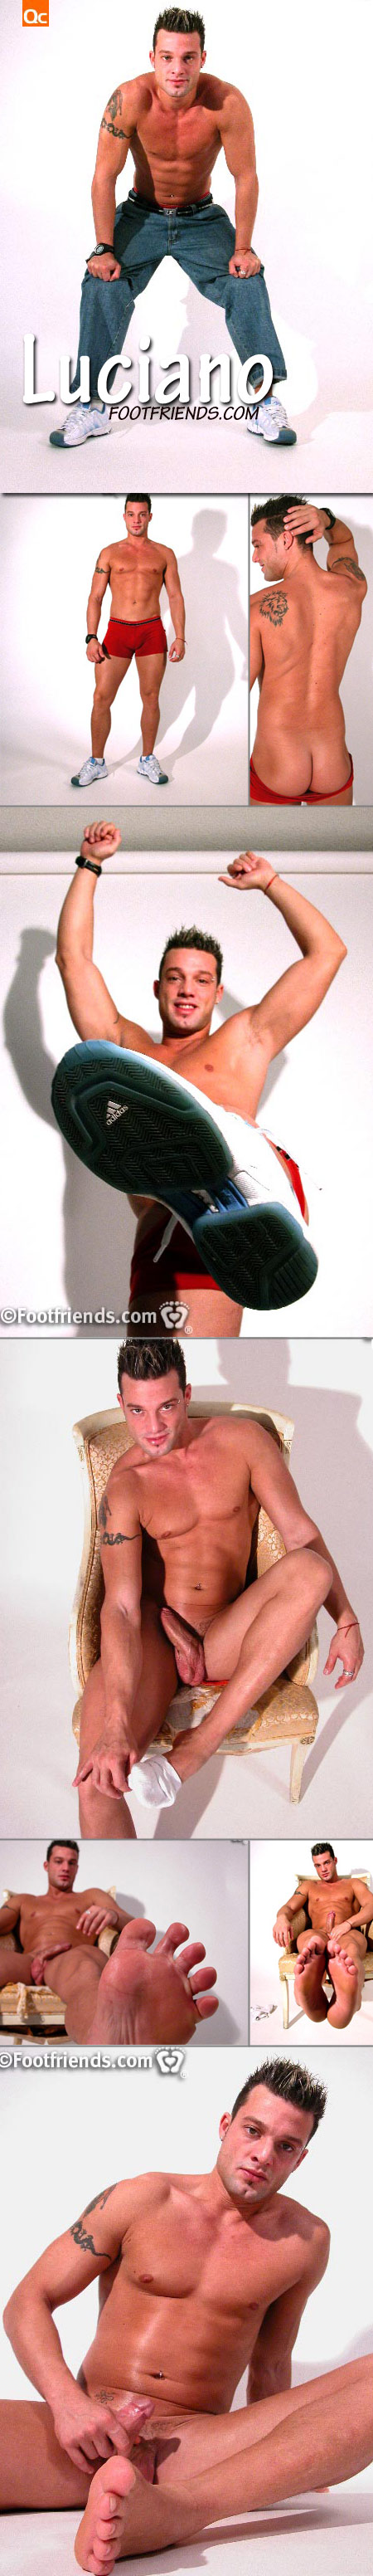 Luciano at FootFriends.com